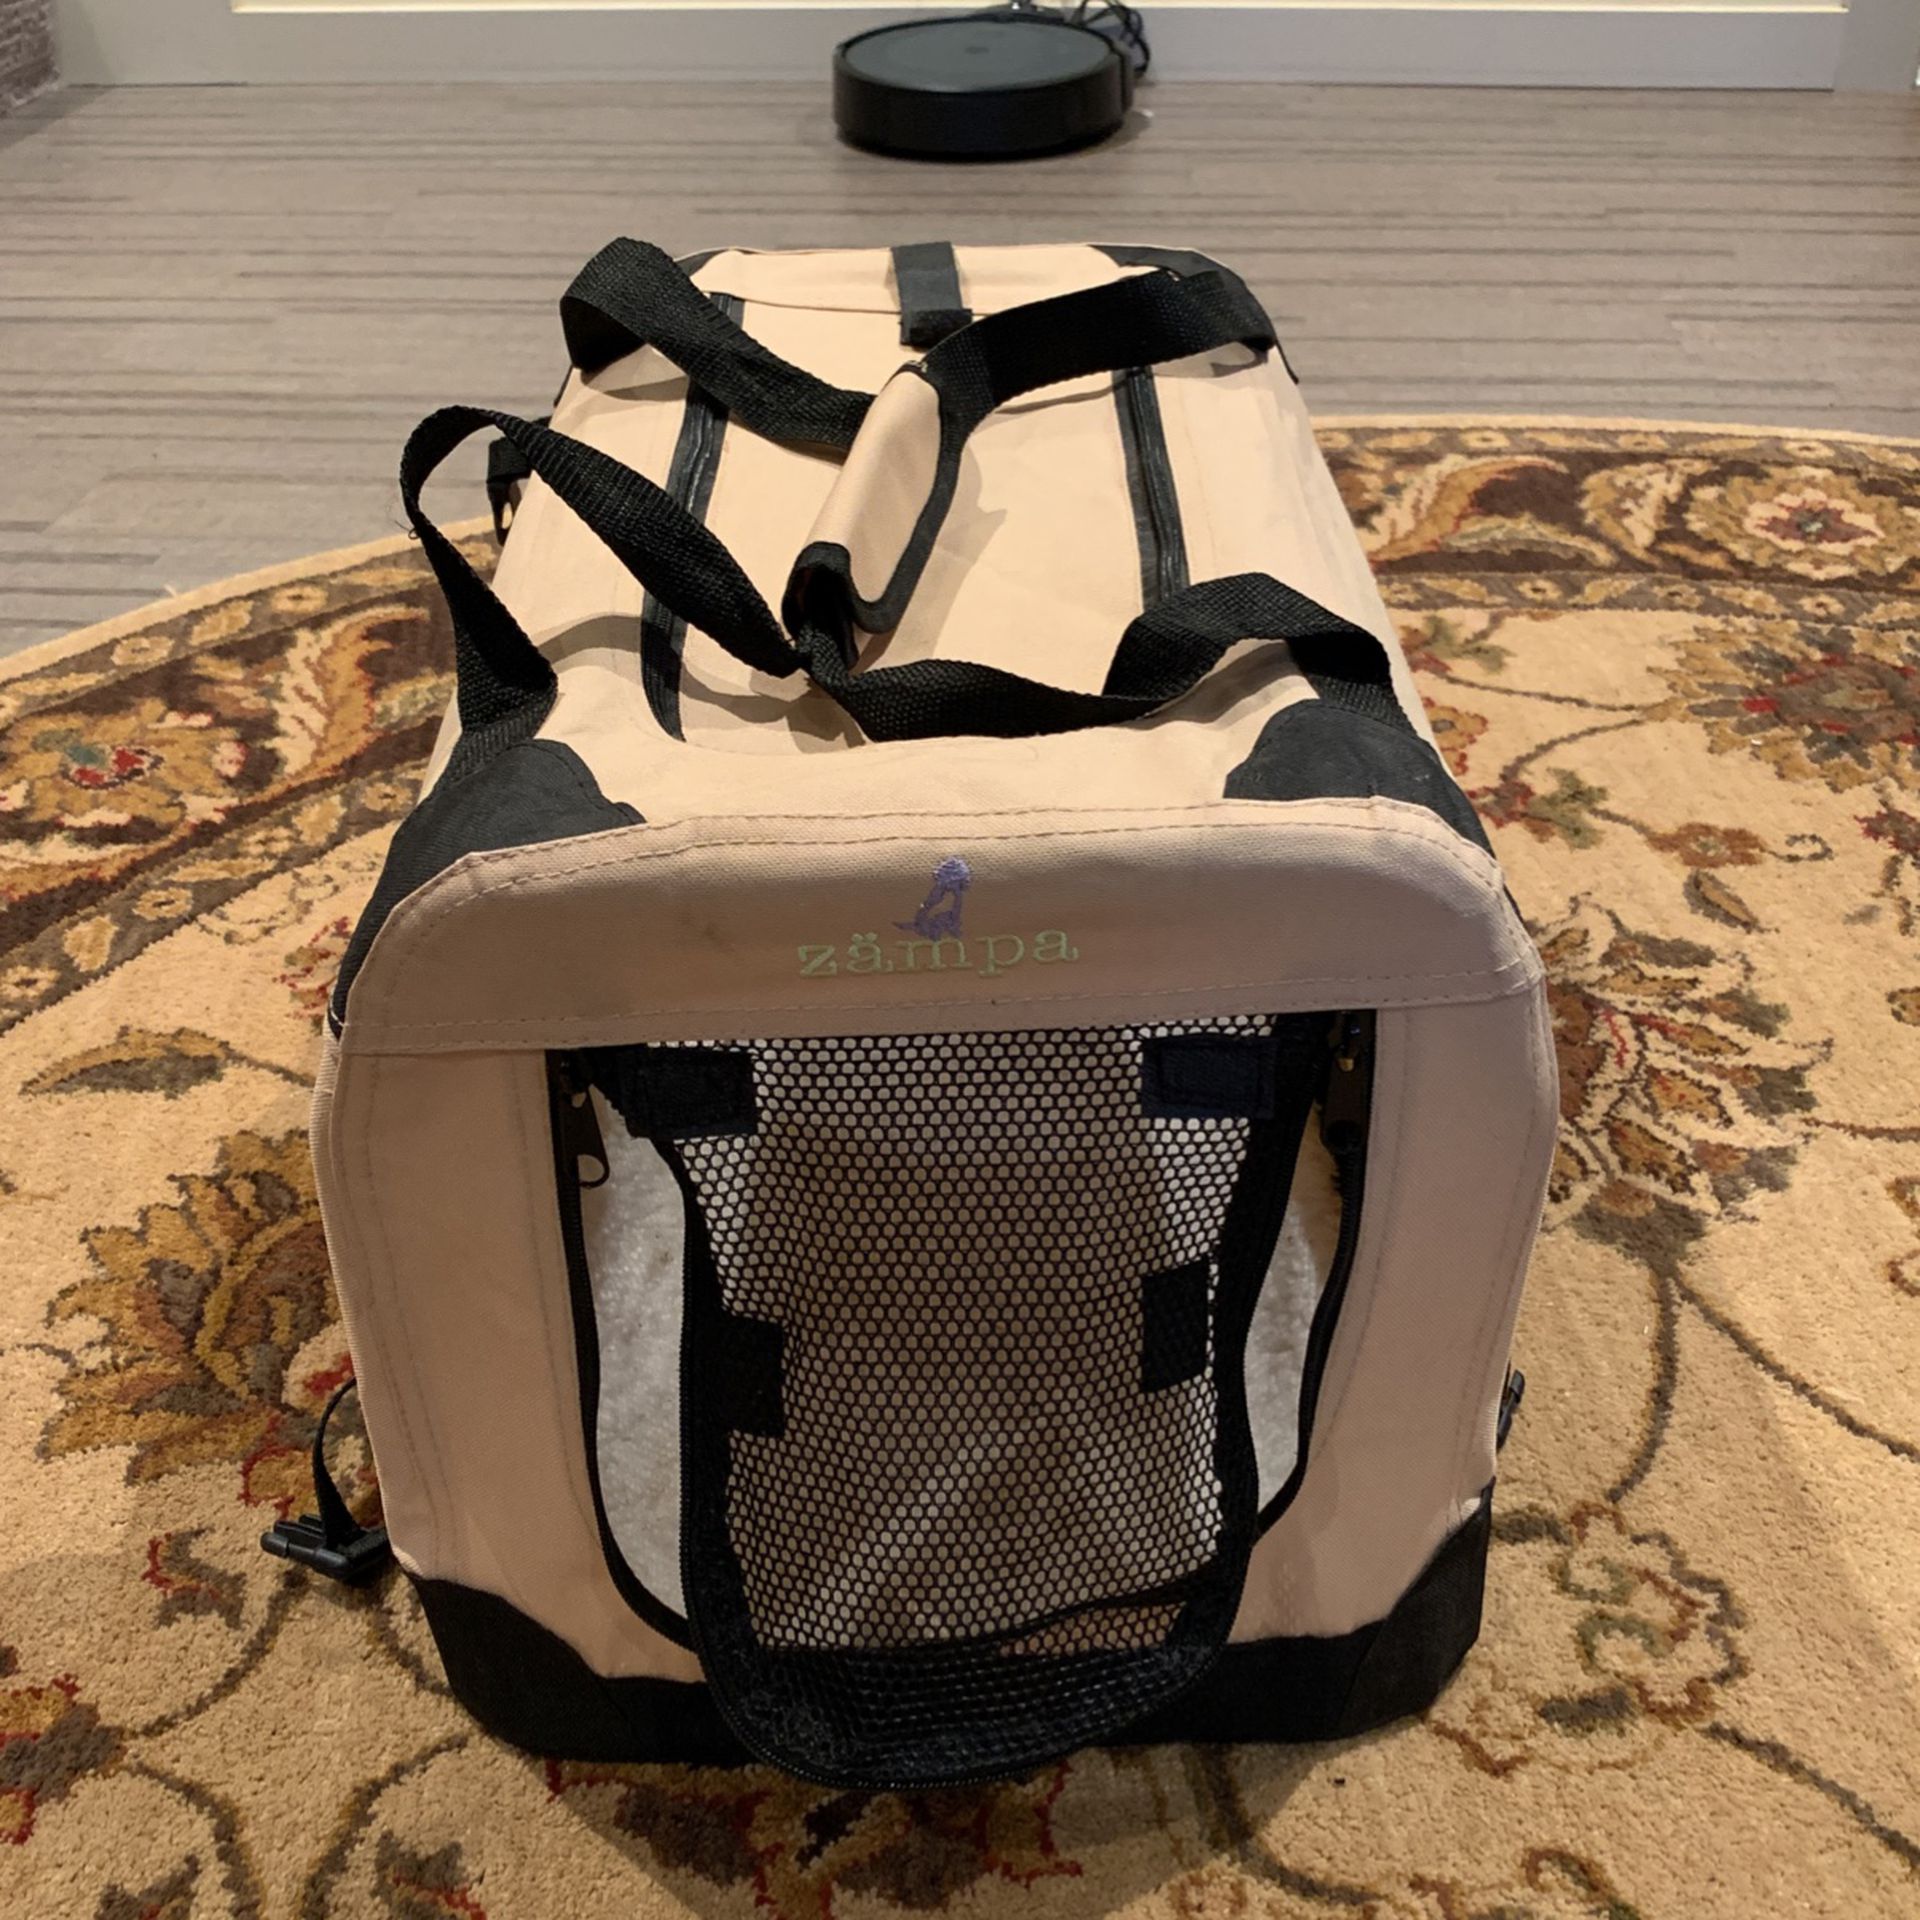 Zampa Collapsible Pet Travel Crate